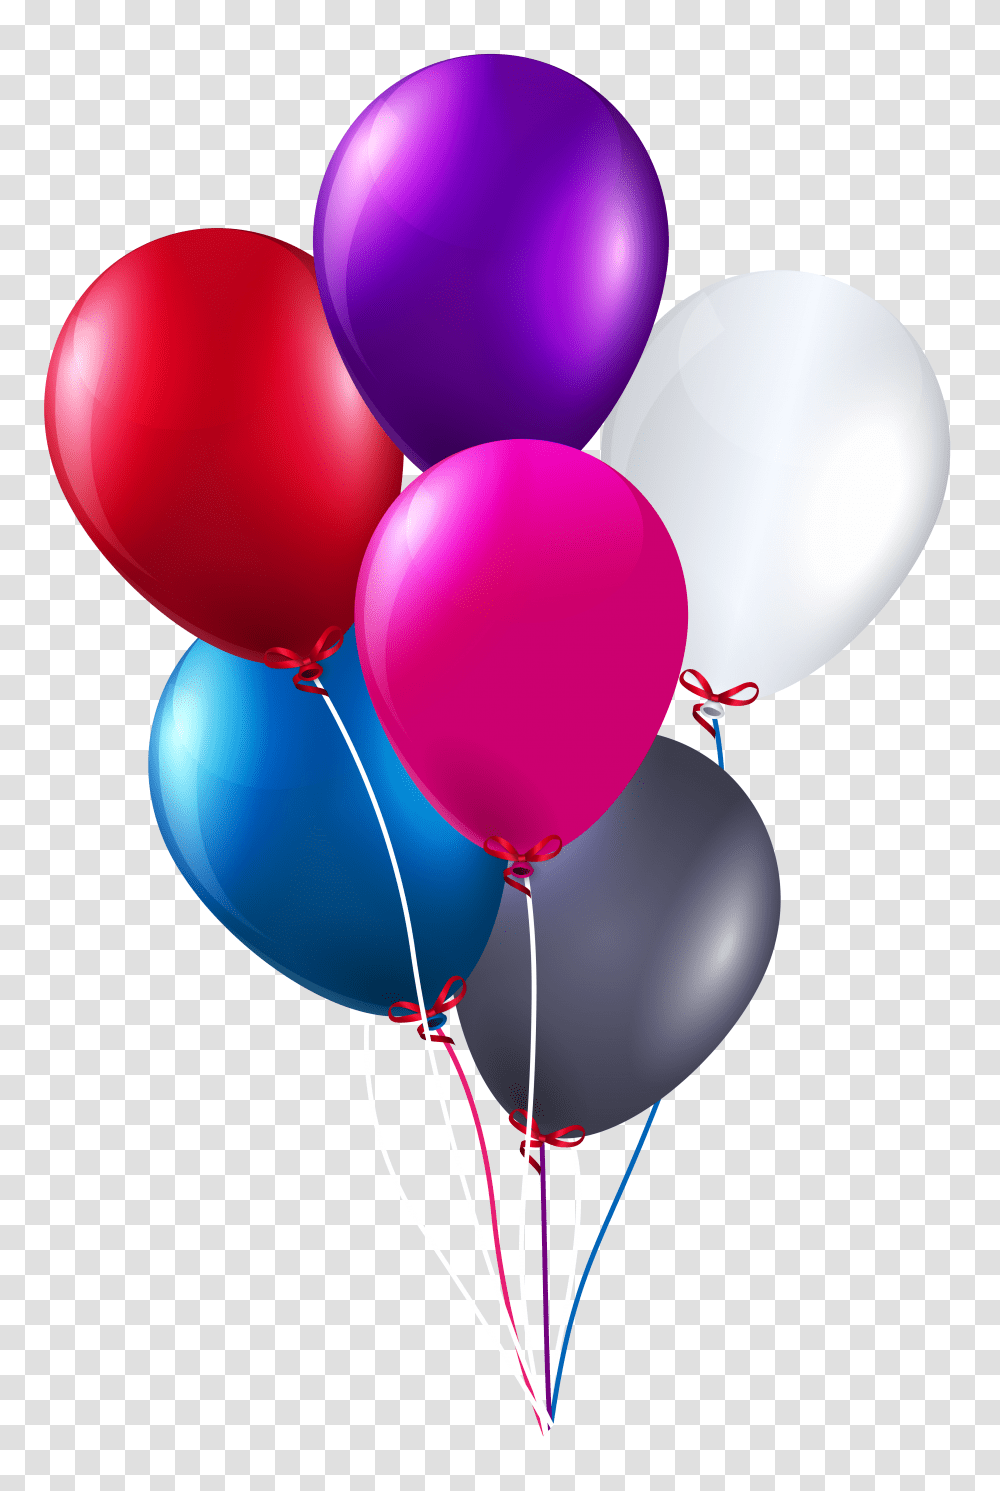 Bunch Of Balloons Clipart Image Balloons Transparent Png